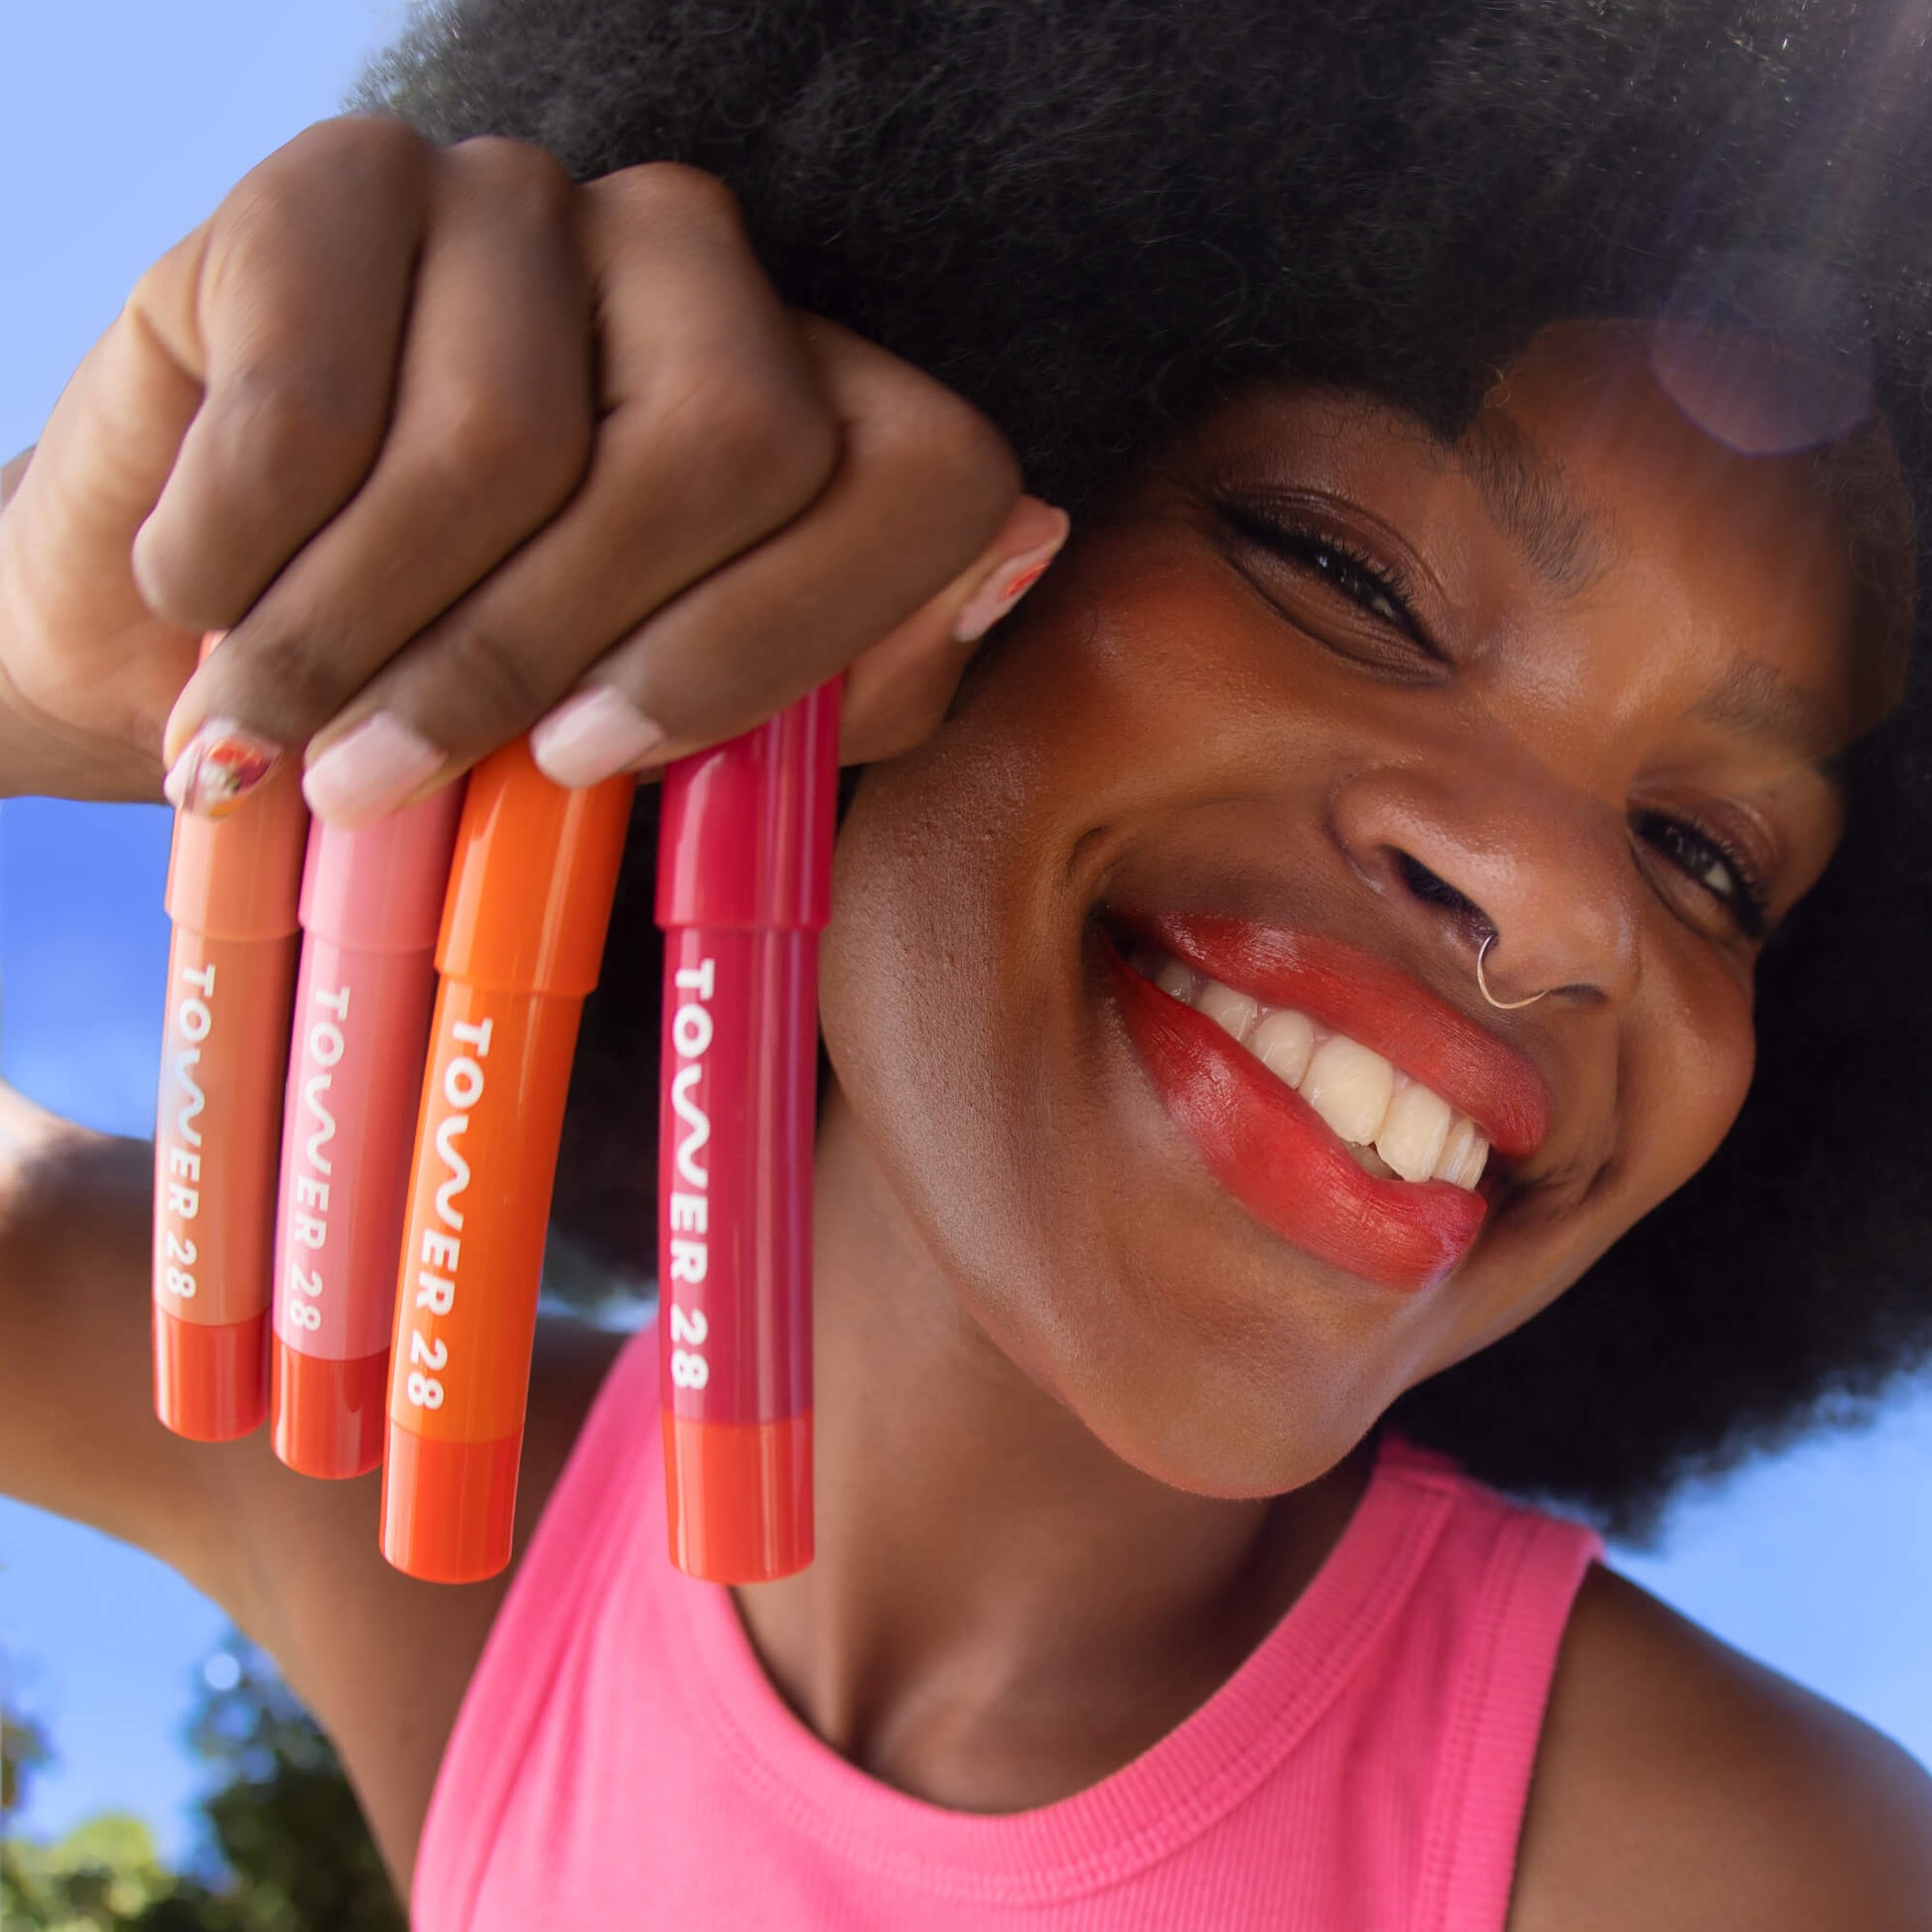 Shared: A model holding all four shades of Tower 28 Beauty's JuiceBalm in her hands: Drink, Shake, Mix, and Squeeze).